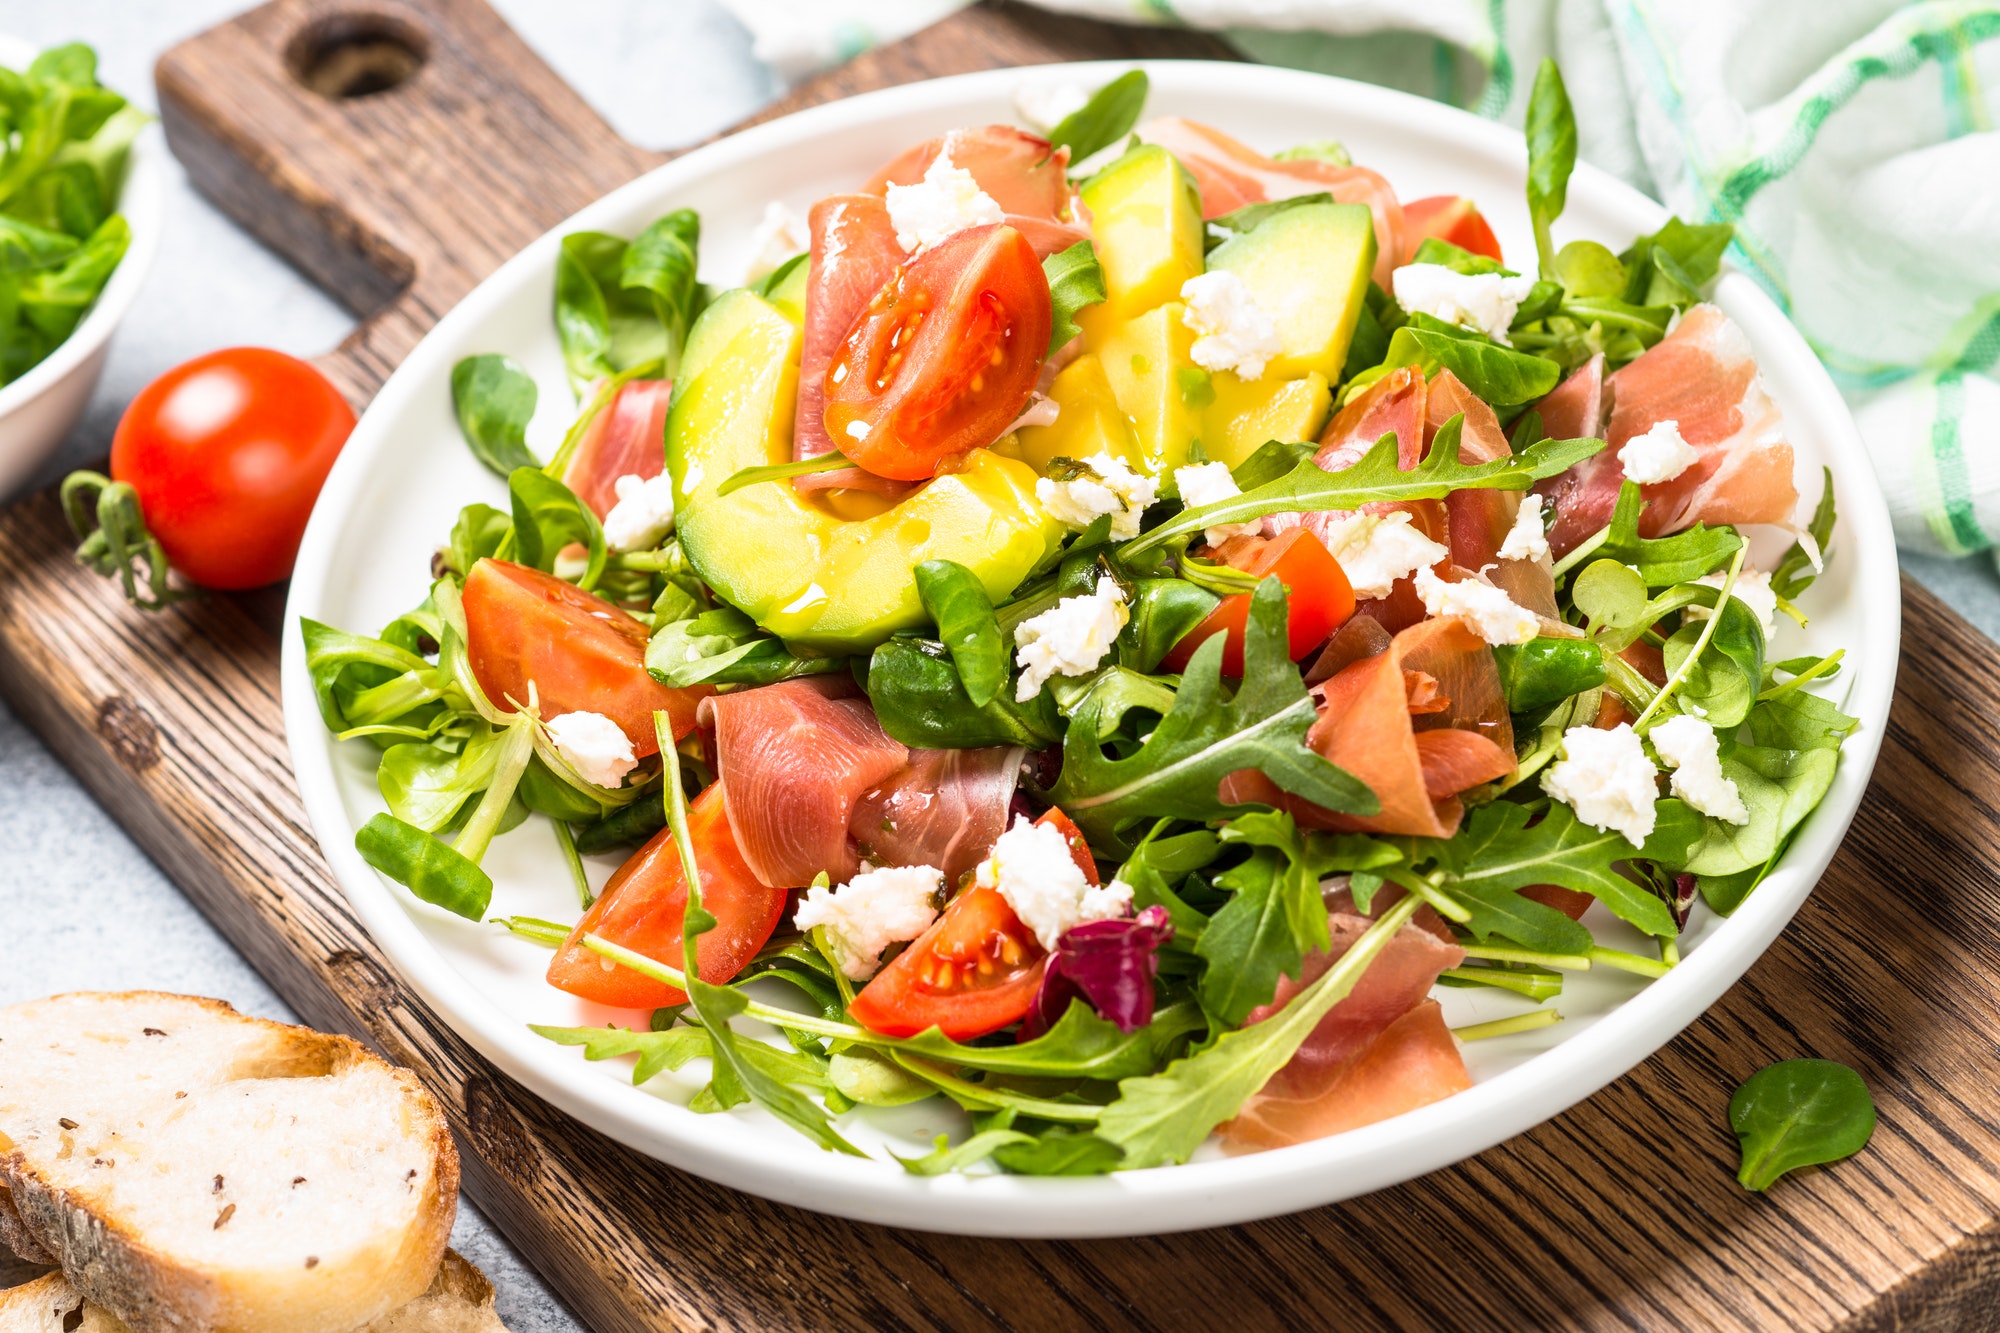 Fresh salad with green leaves, jamon and tomatoes.